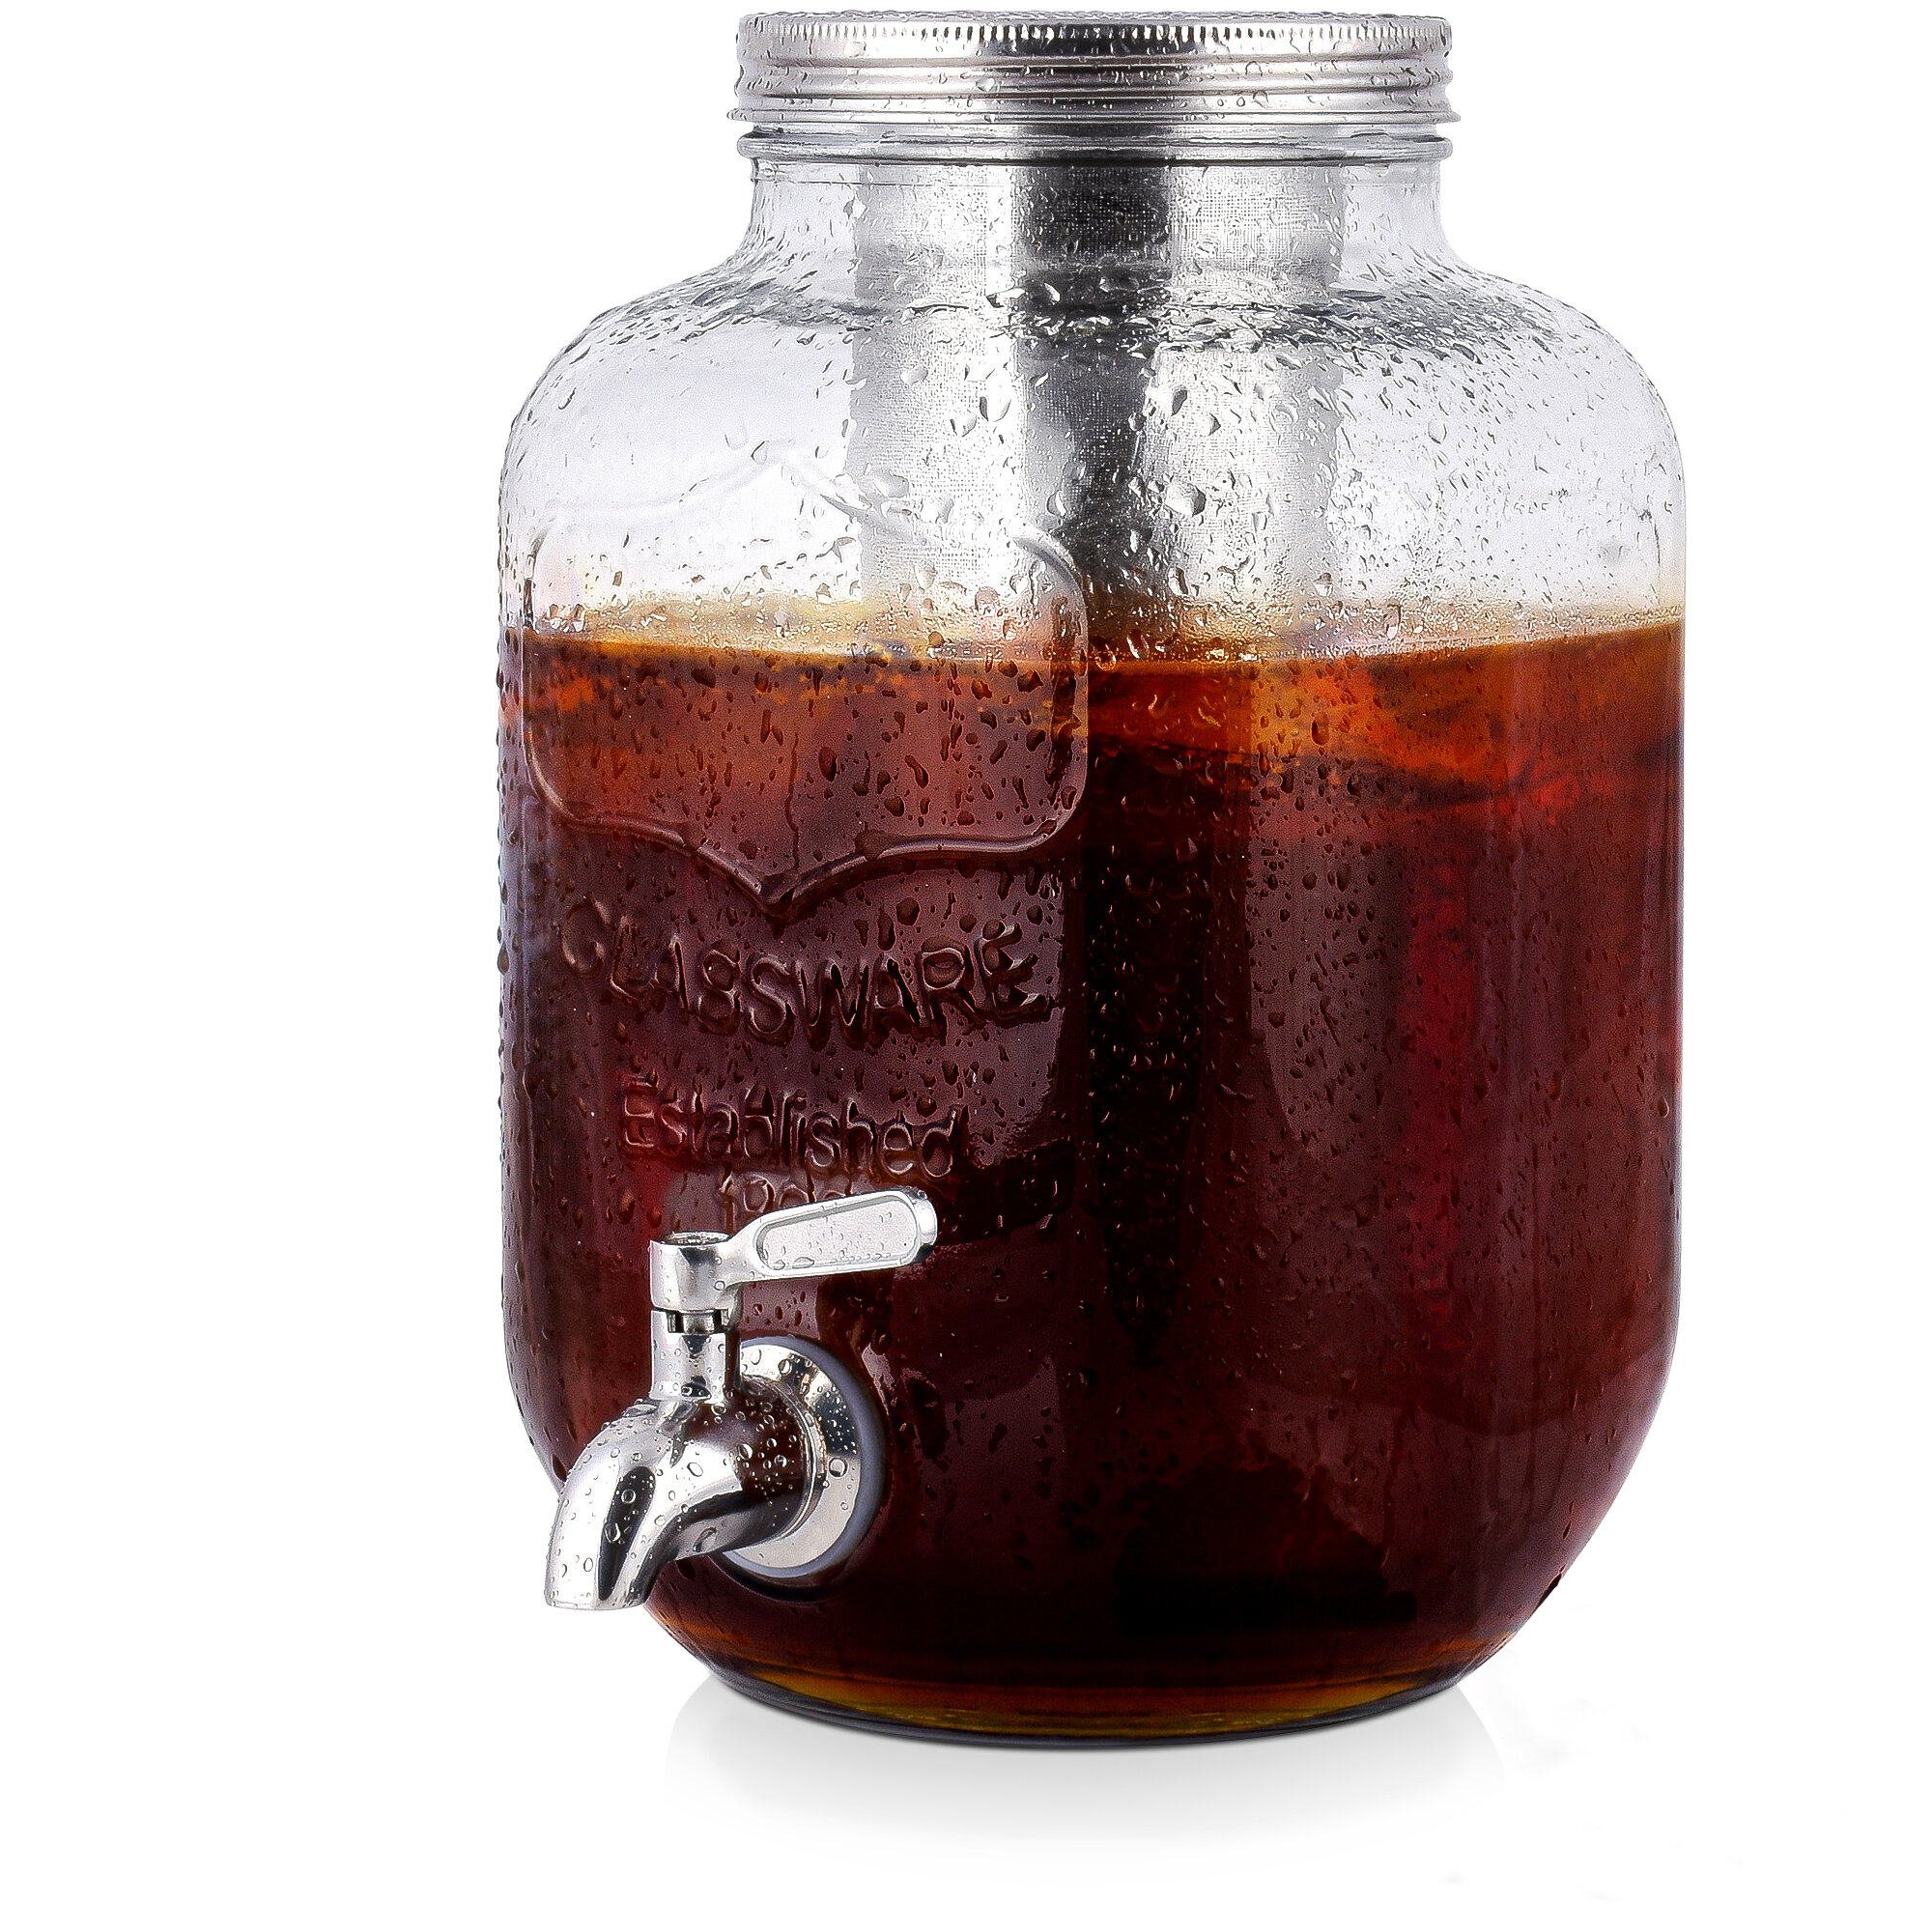 Zulay Kitchen Cold Brew Coffee Maker & Reviews